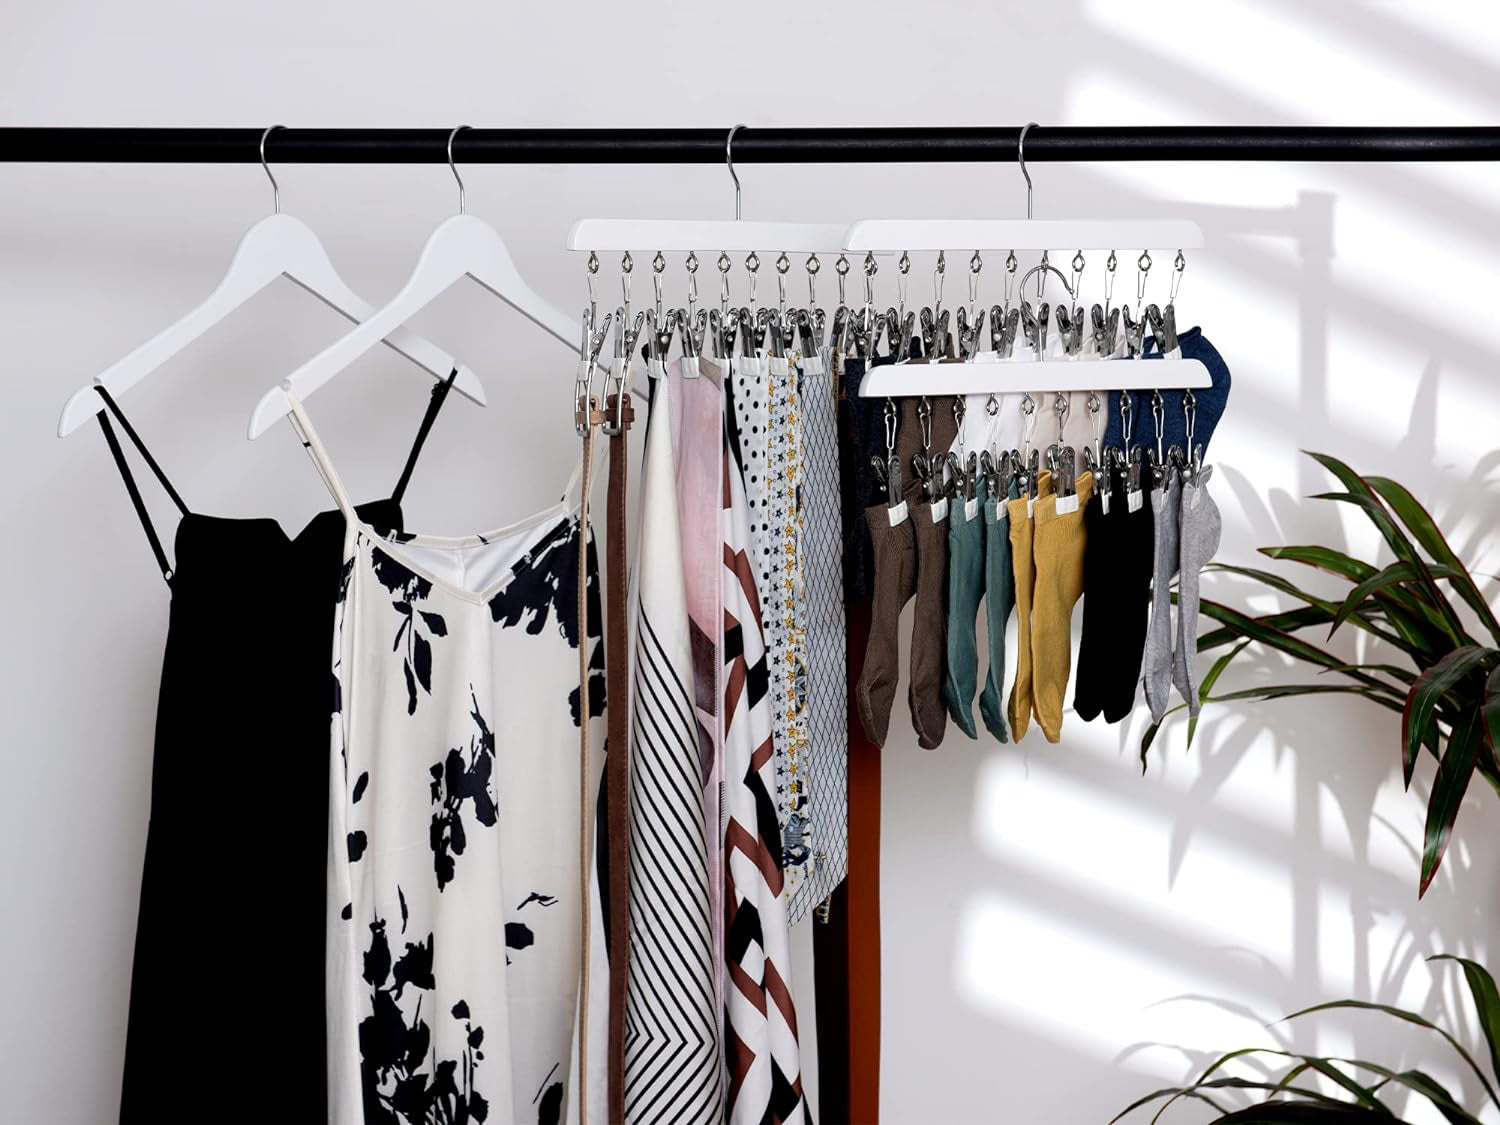 The Best Wooden Hangers for Your Closet – STORAGEWORKS